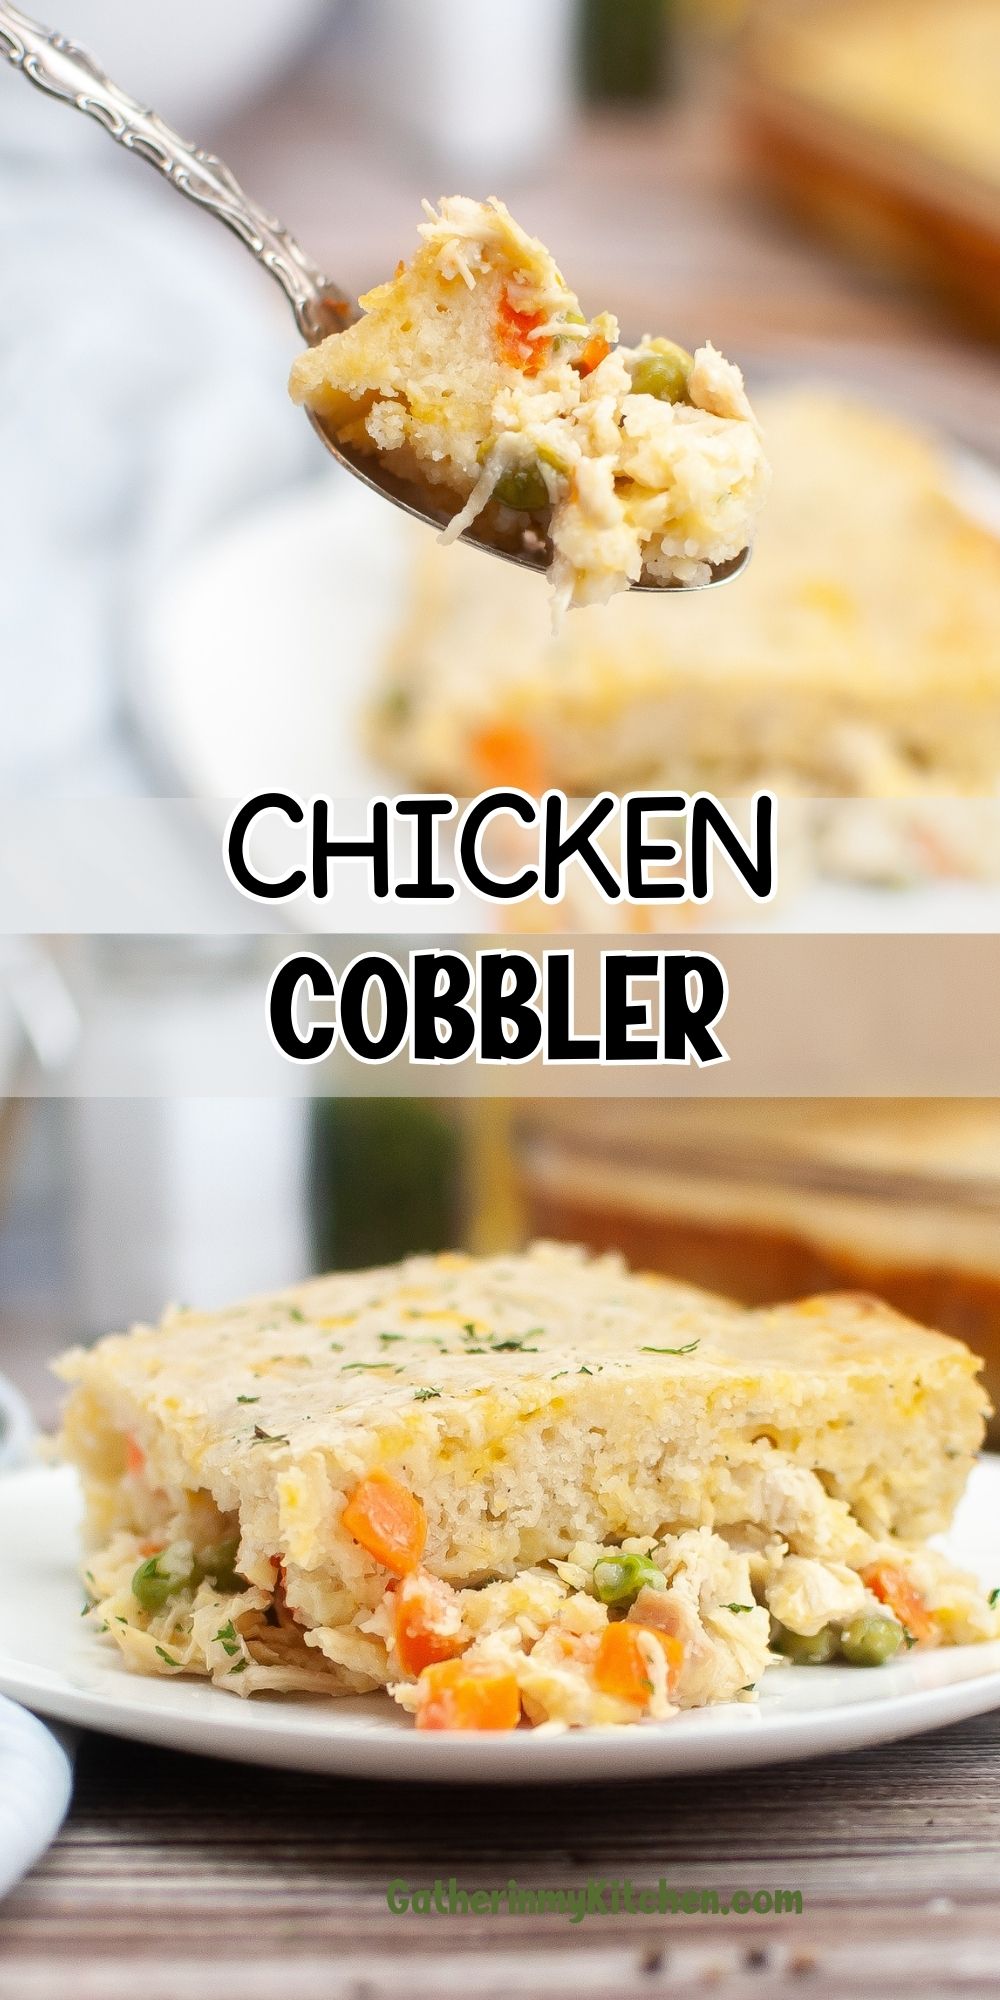 Pin image: top and bottom pics of chicken cobbler, middle says "Chicken Cobbler".